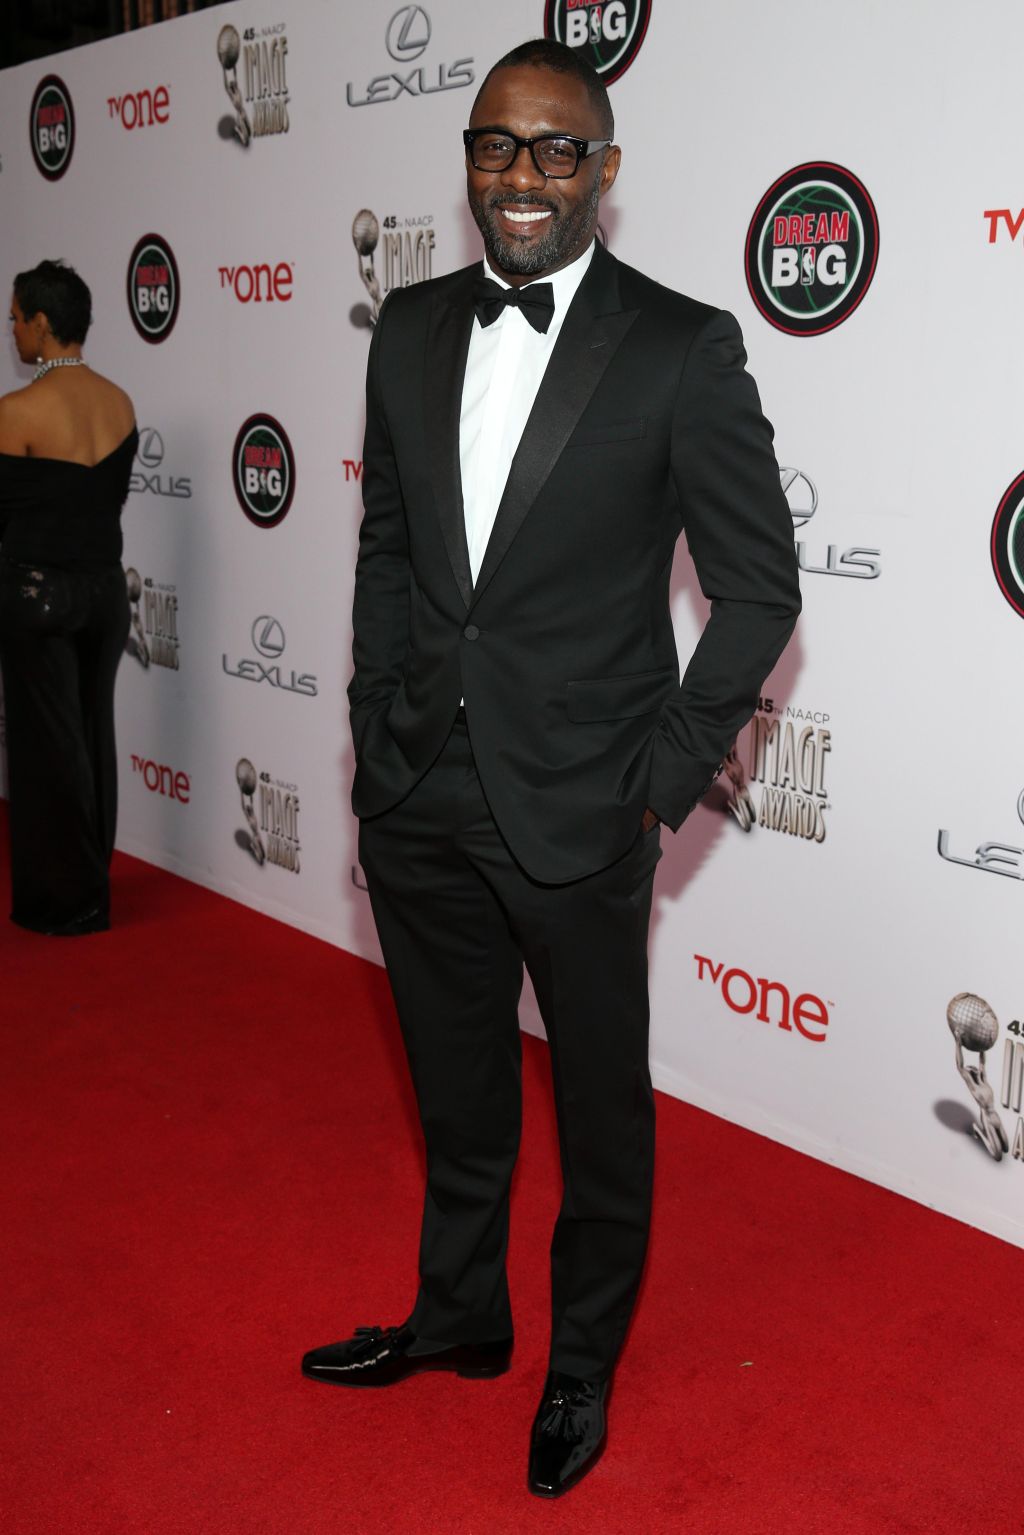 TV One At The 45th NAACP Image Awards